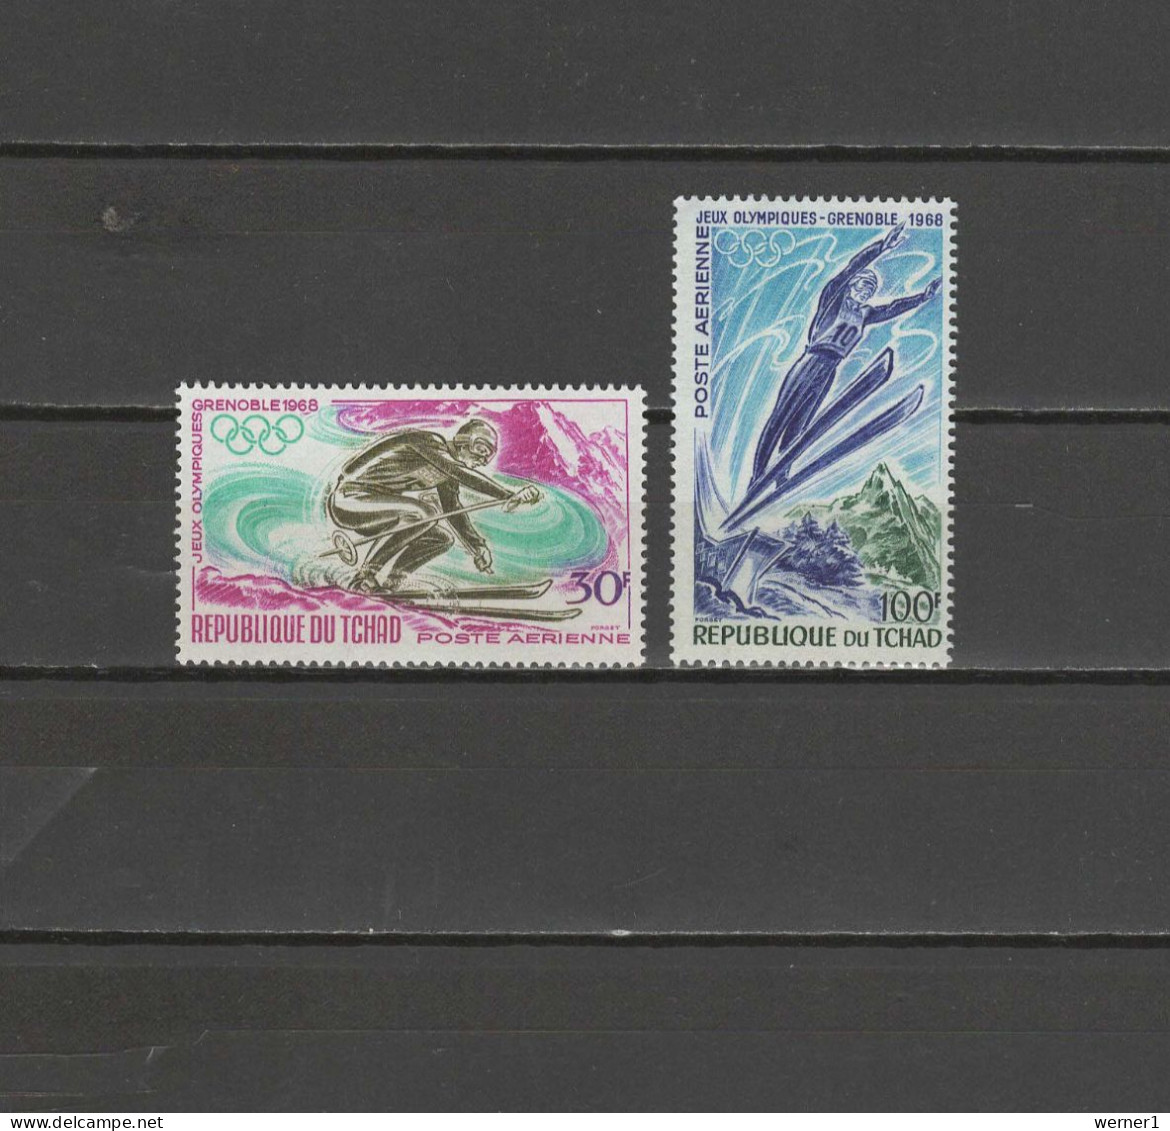 Chad - Tchad 1968 Olympic Games Grenoble Set Of 2 MNH - Hiver 1968: Grenoble